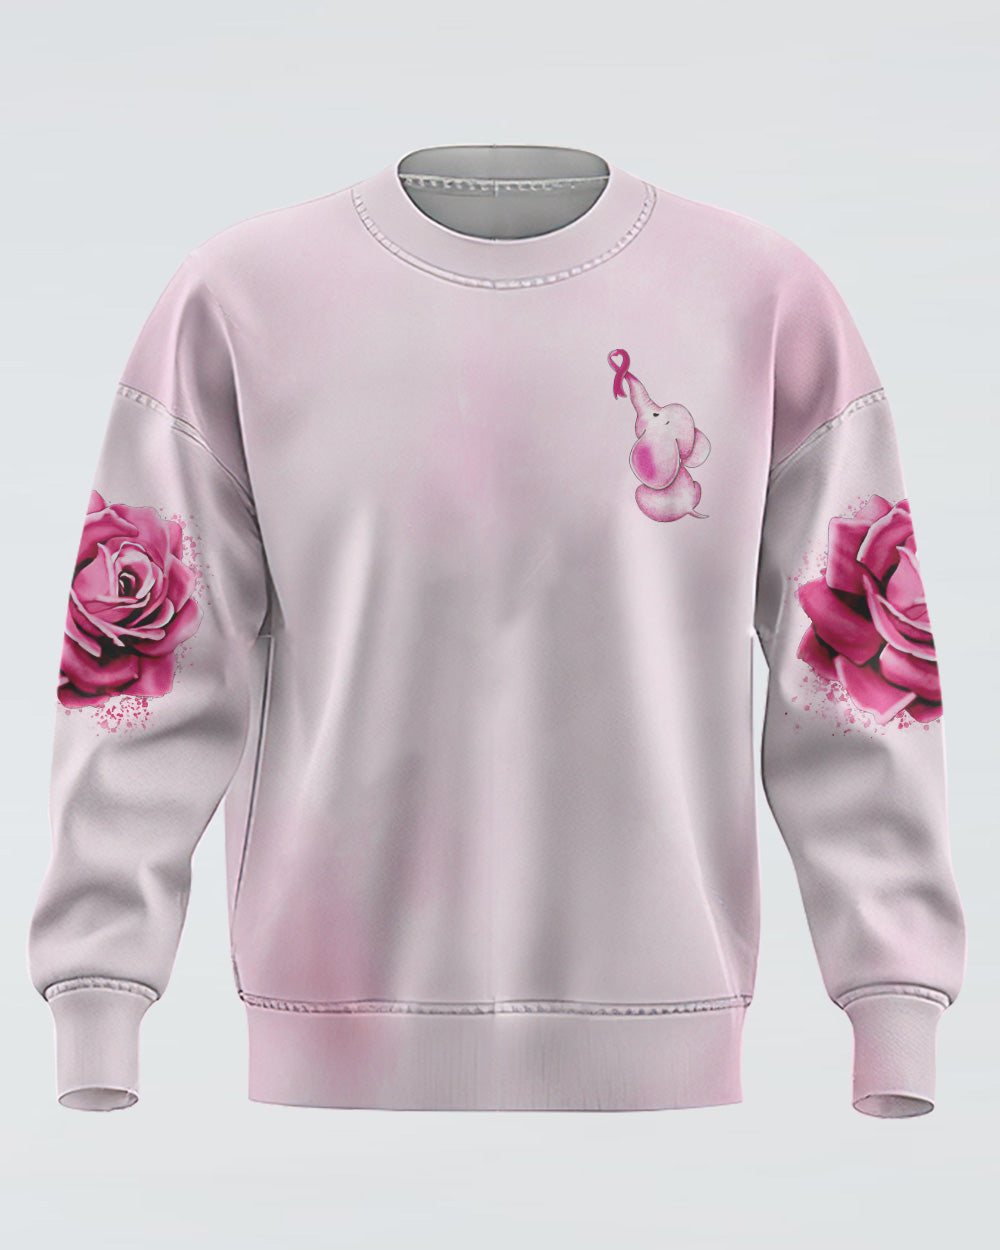 Never Give Up Rose Elephant Women's Breast Cancer Awareness Sweatshirt